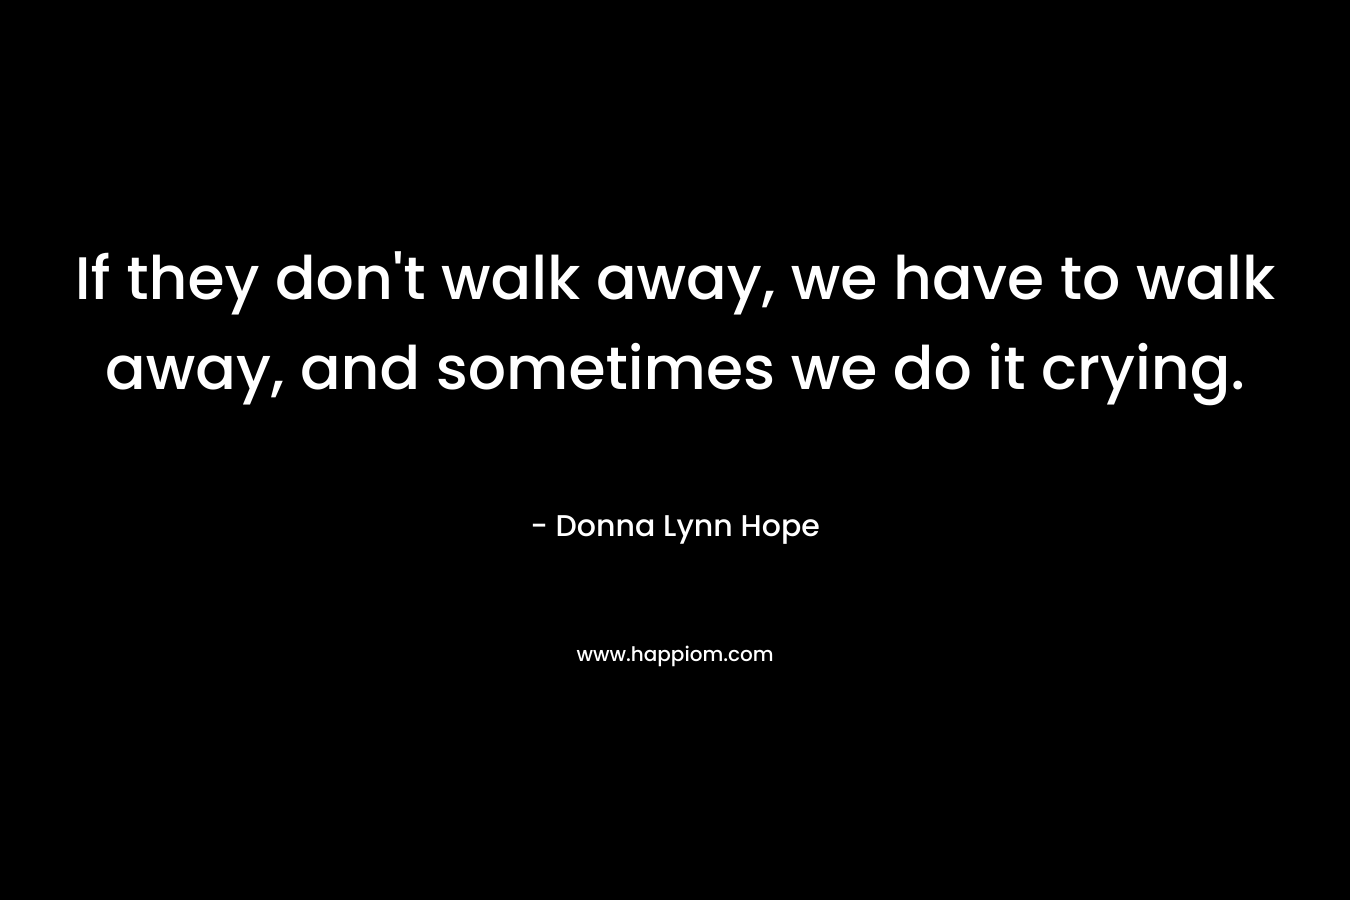 If they don’t walk away, we have to walk away, and sometimes we do it crying. – Donna Lynn Hope